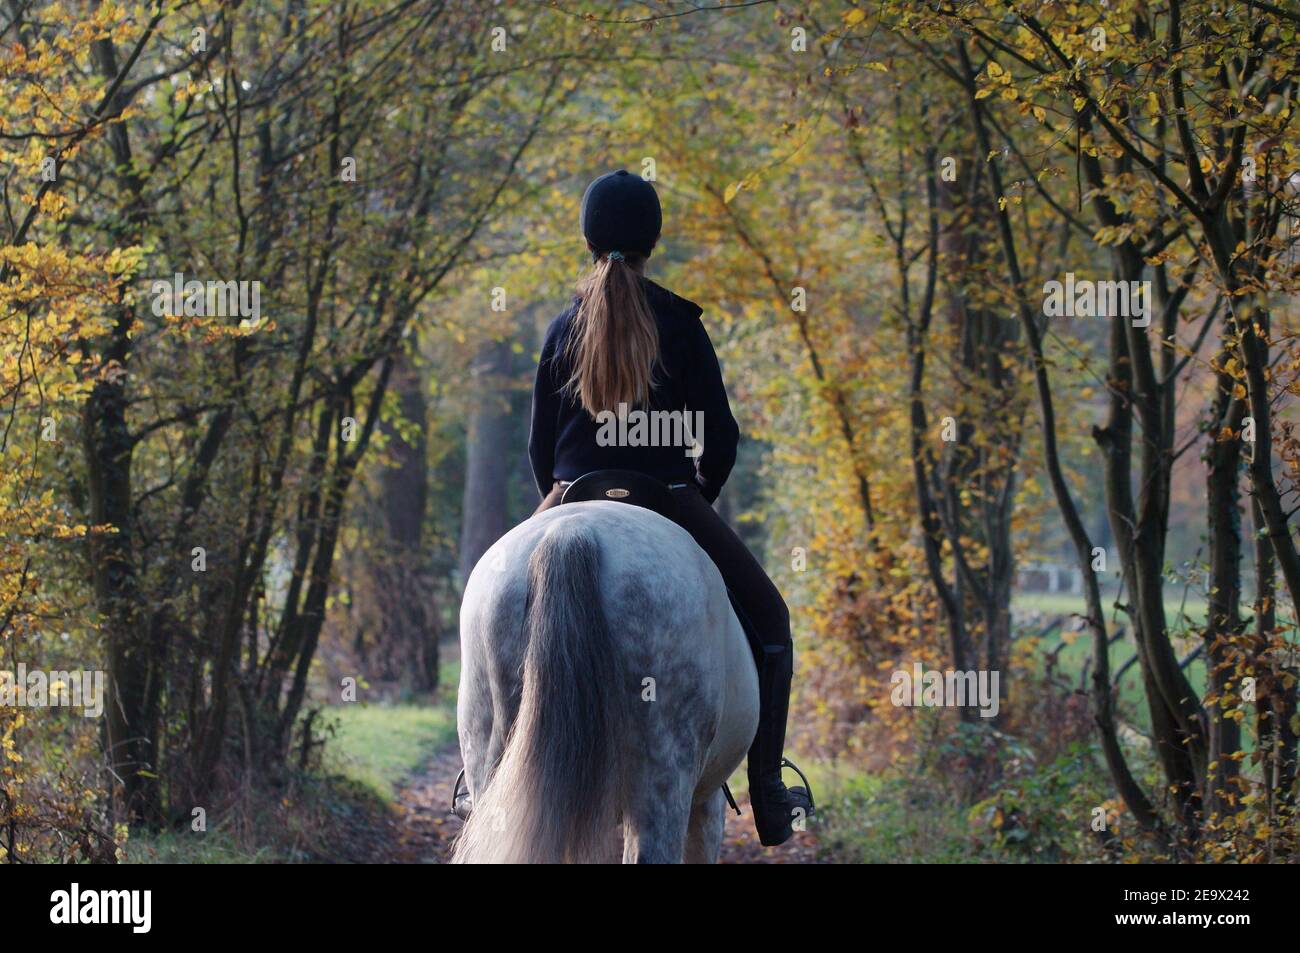 girl riding a horse, hacking out in autumn forest Stock Photo